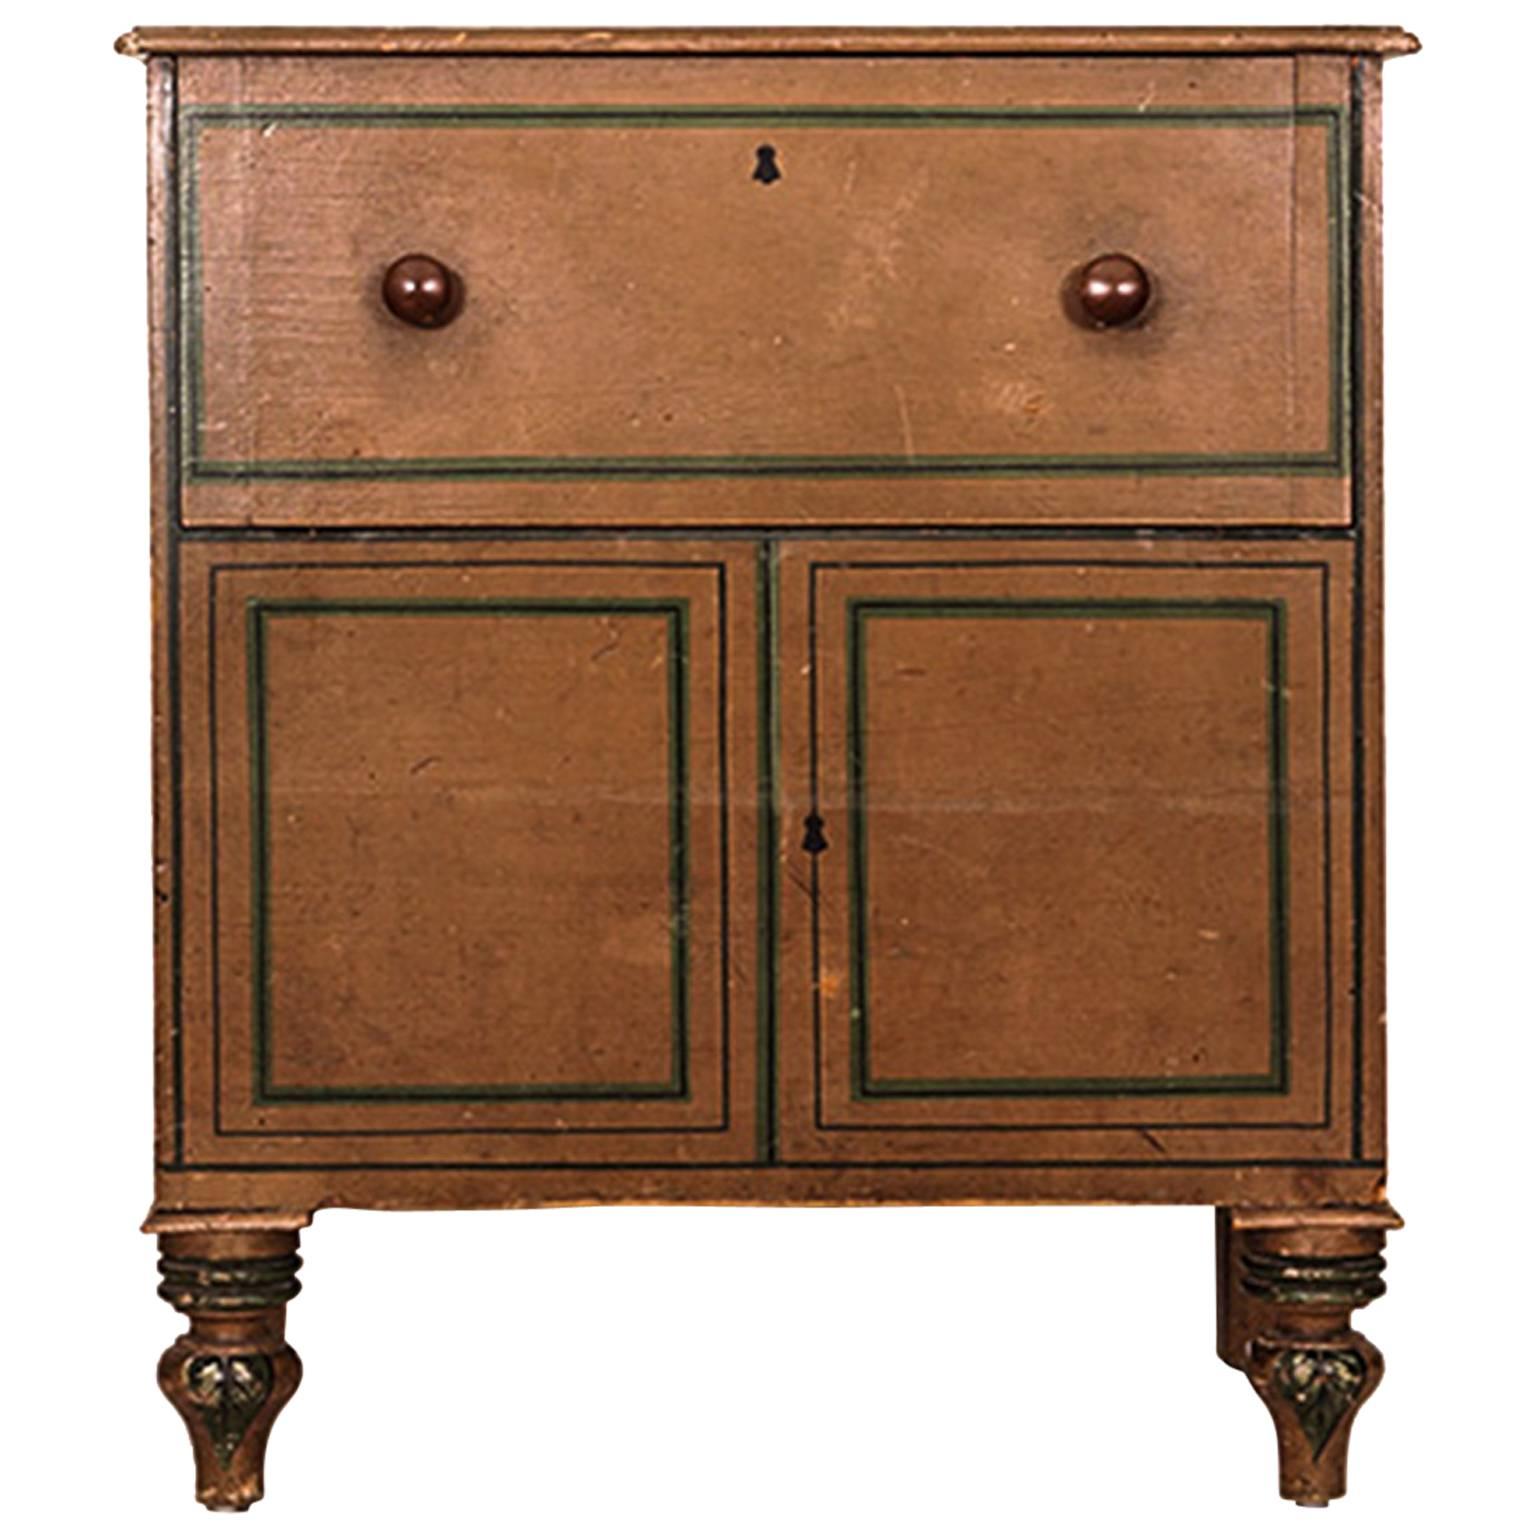 19th Century English Regency Period Painted Pine Child's Commode For Sale